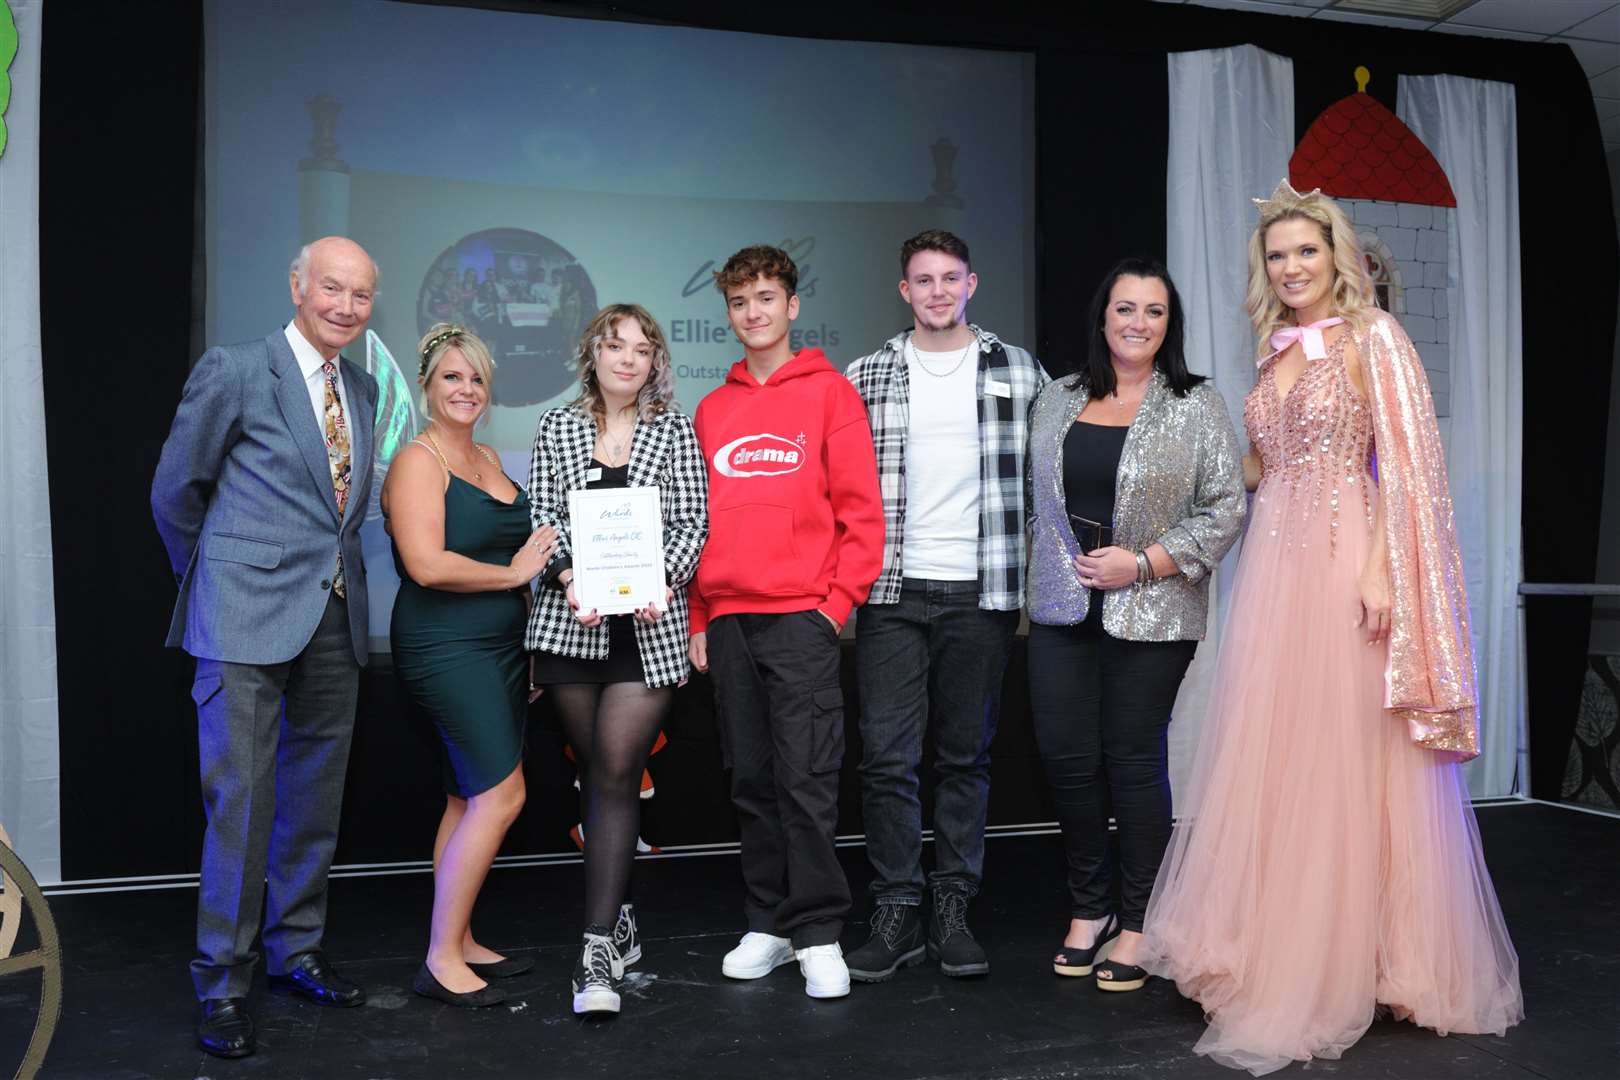 The team from Ellie's Angels collect their award. Image: Simon Hildrew.